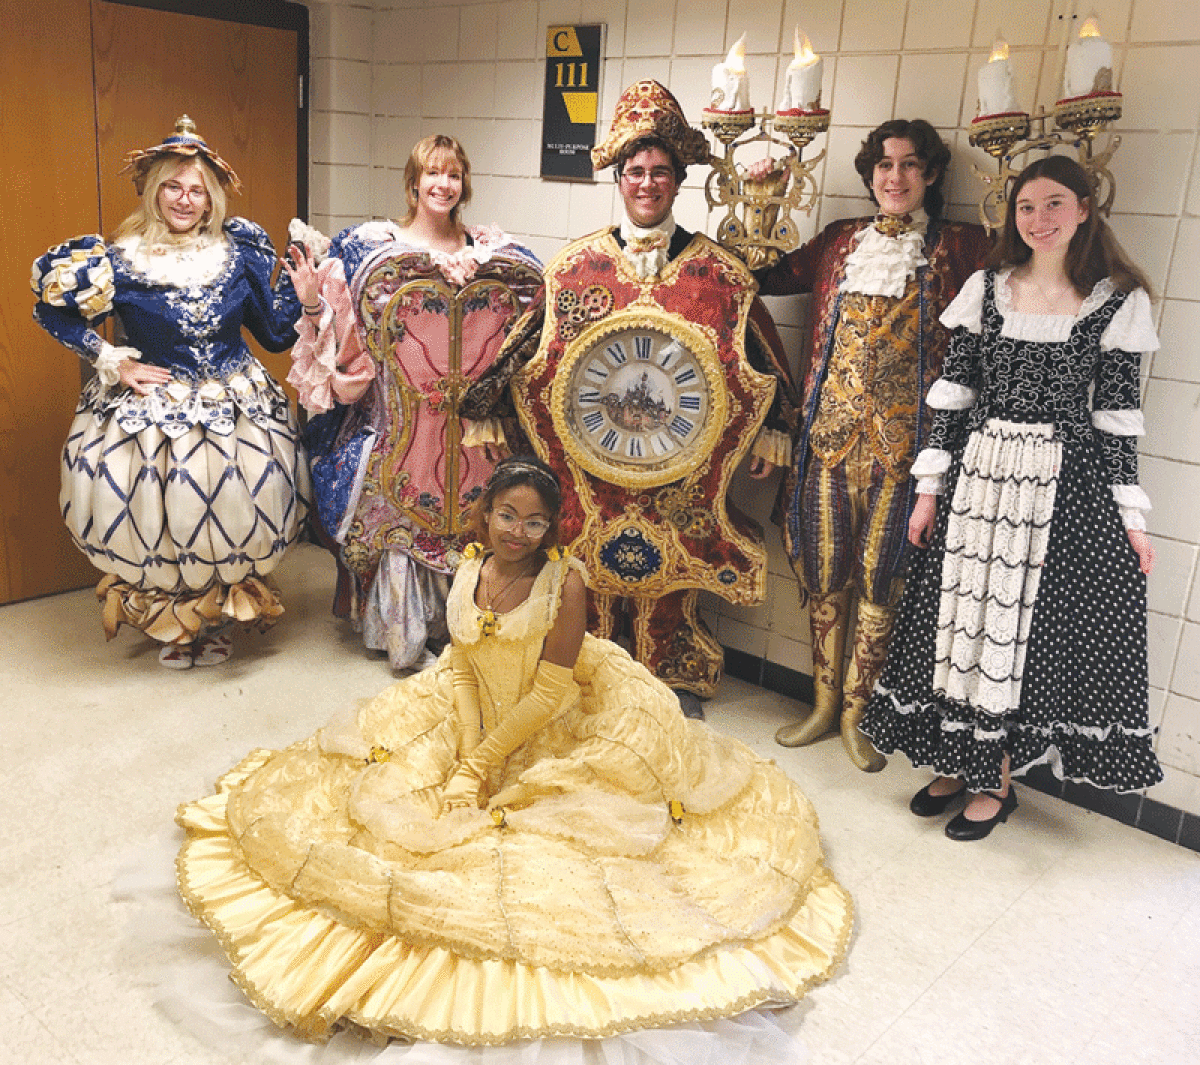  Cast members from Grosse Pointe North High School’s production of “Beauty and the Beast” don the intricate costumes that they’ll be wearing onstage this month. 